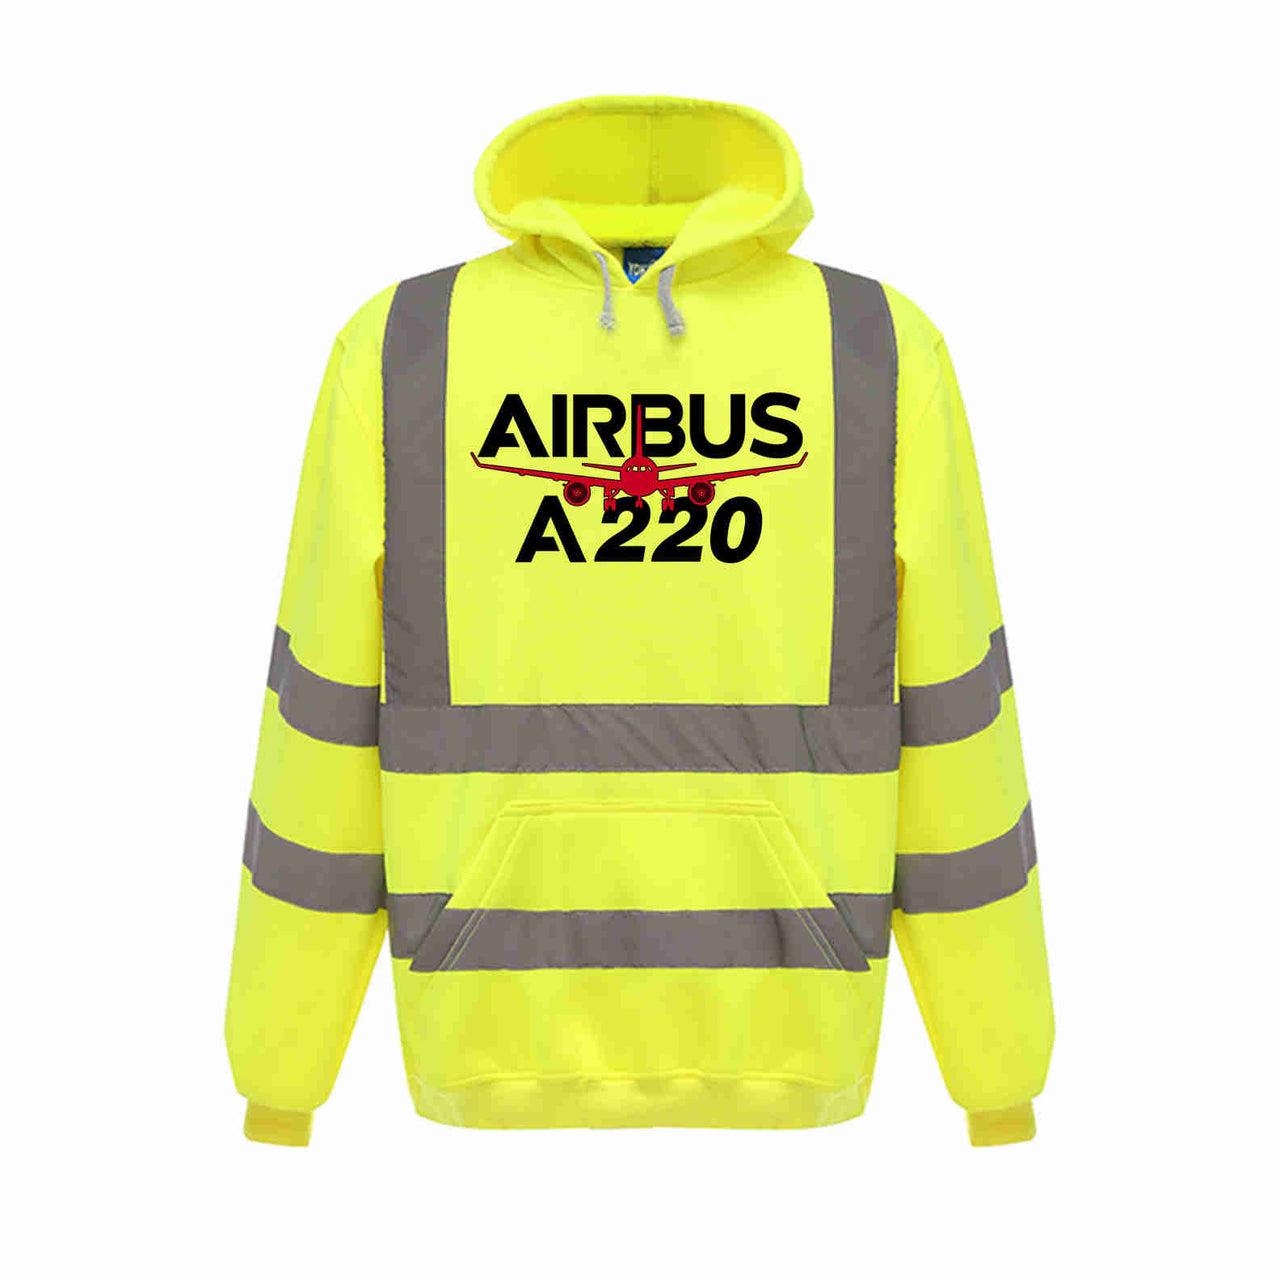 Amazing Airbus A220 Designed Reflective Hoodies